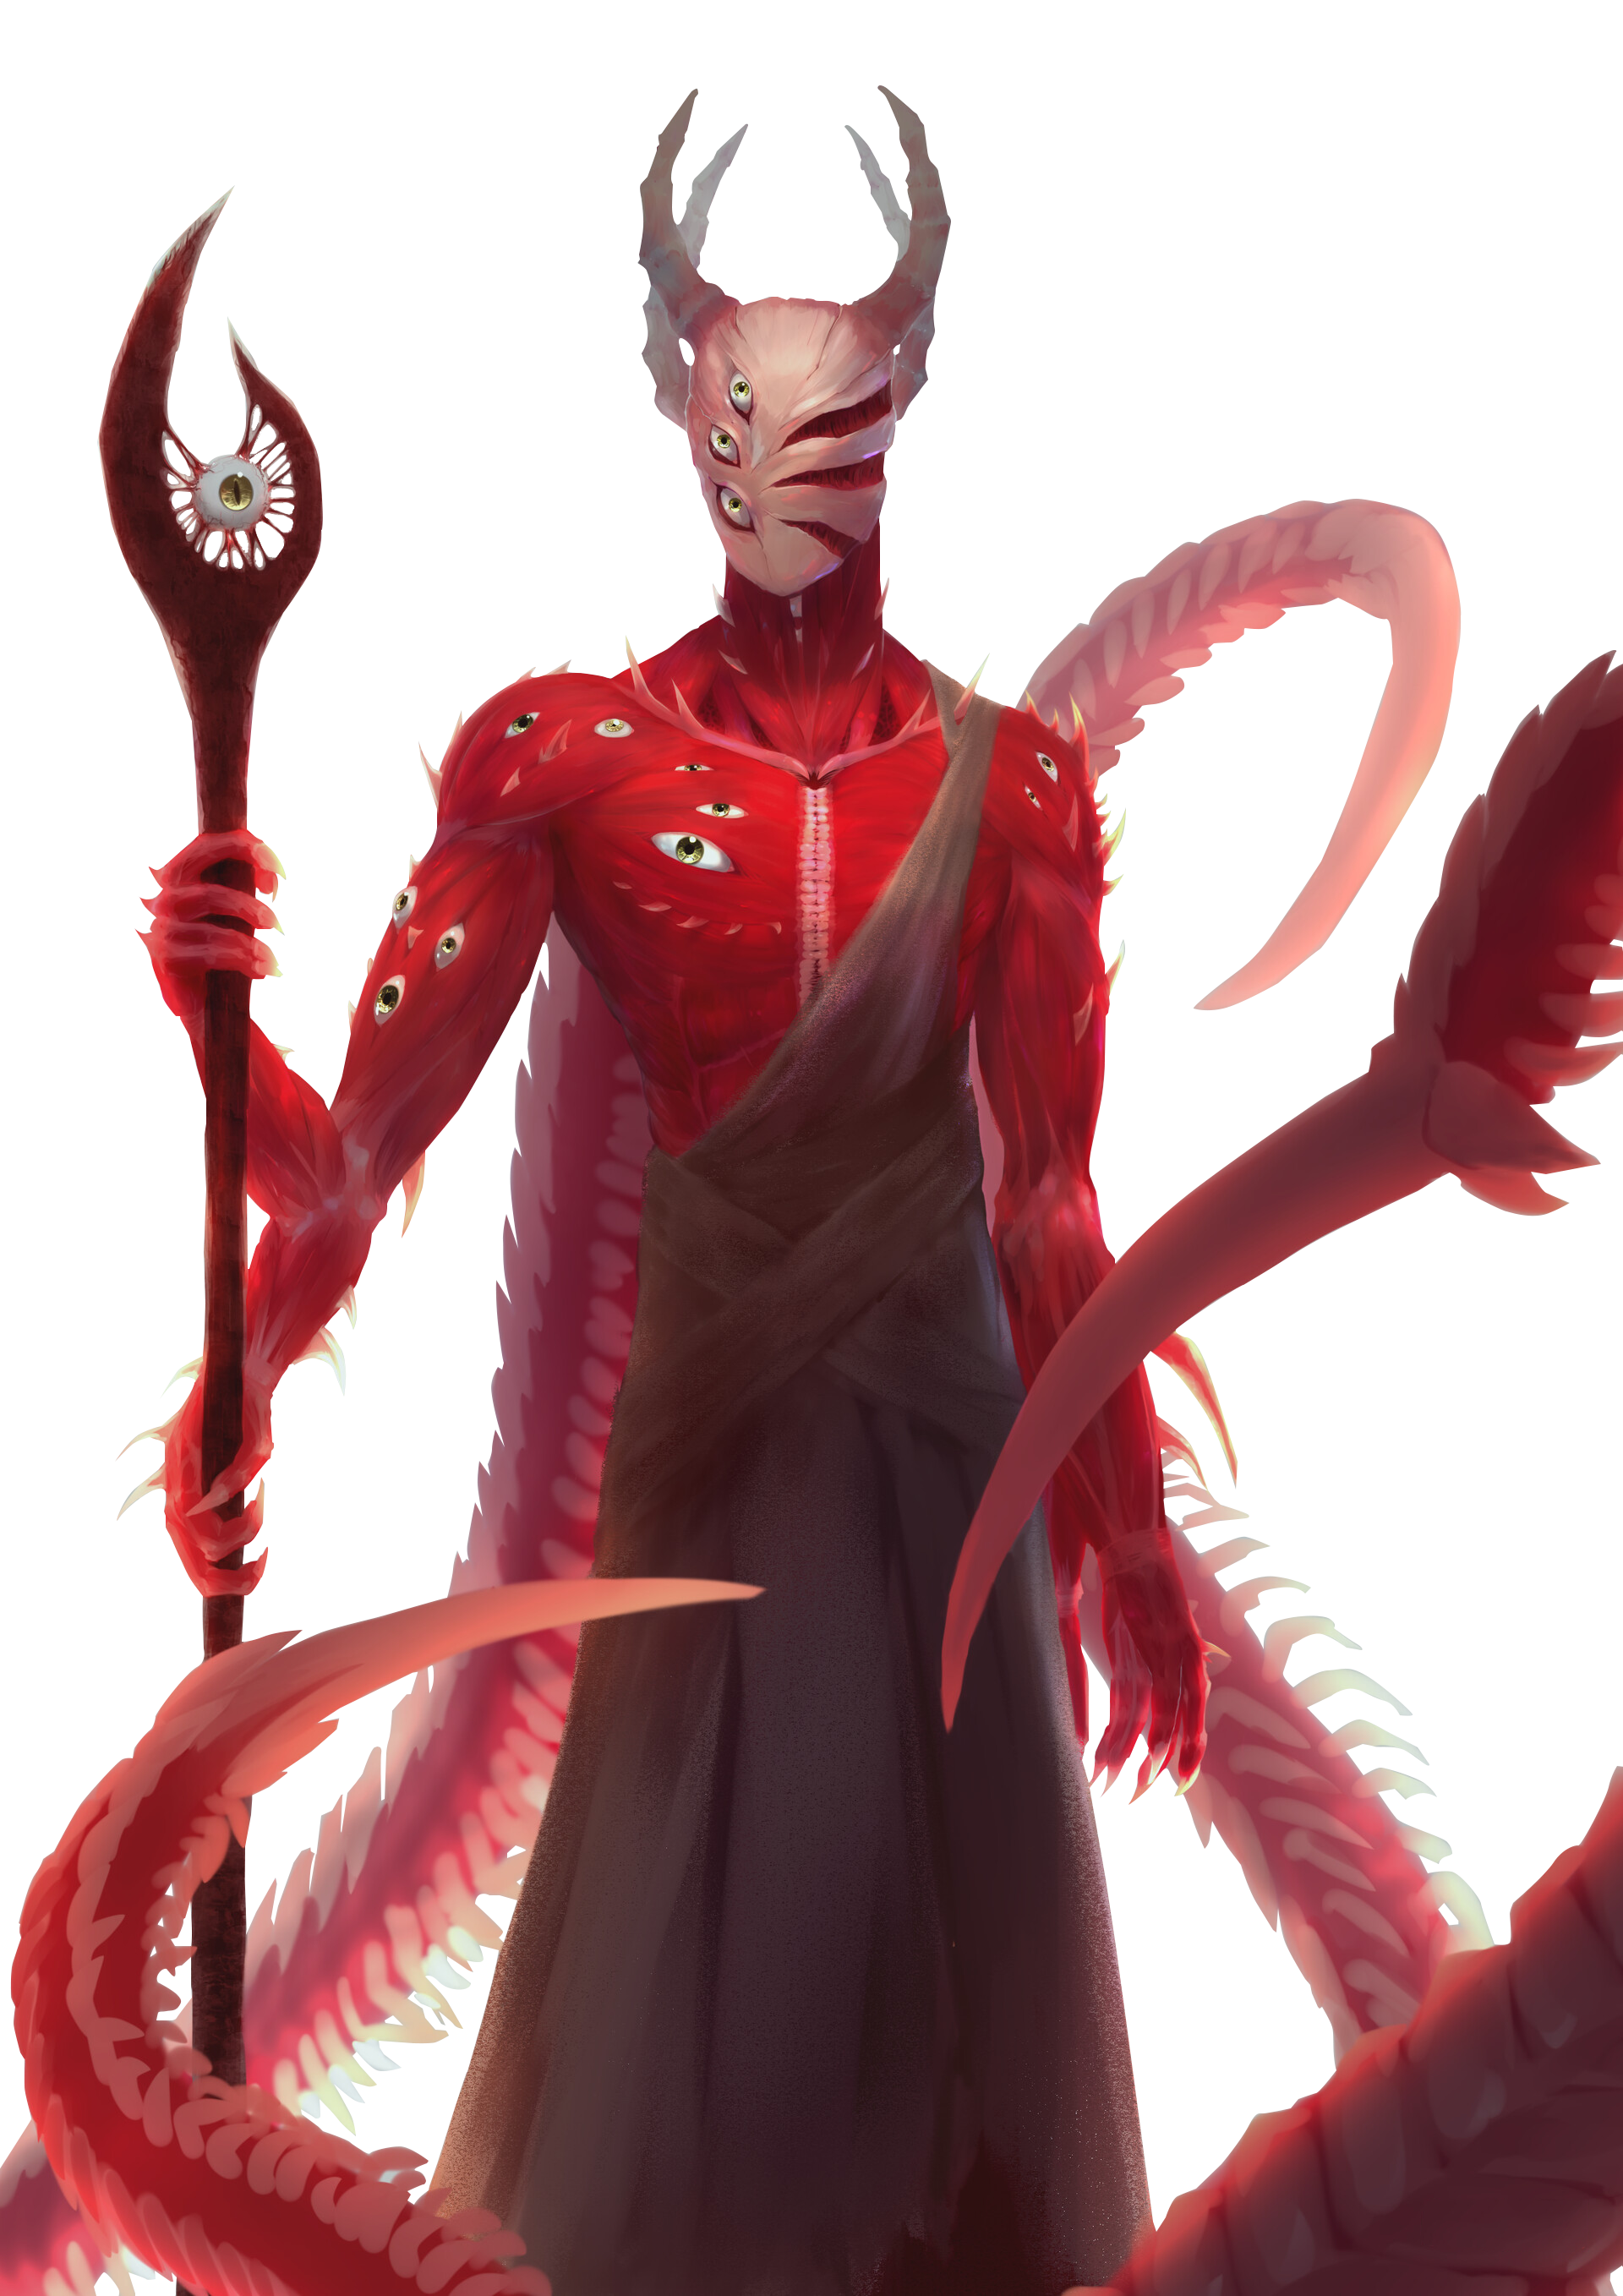 SCP-076-2/Abel (Render #1) by fireboilord on DeviantArt